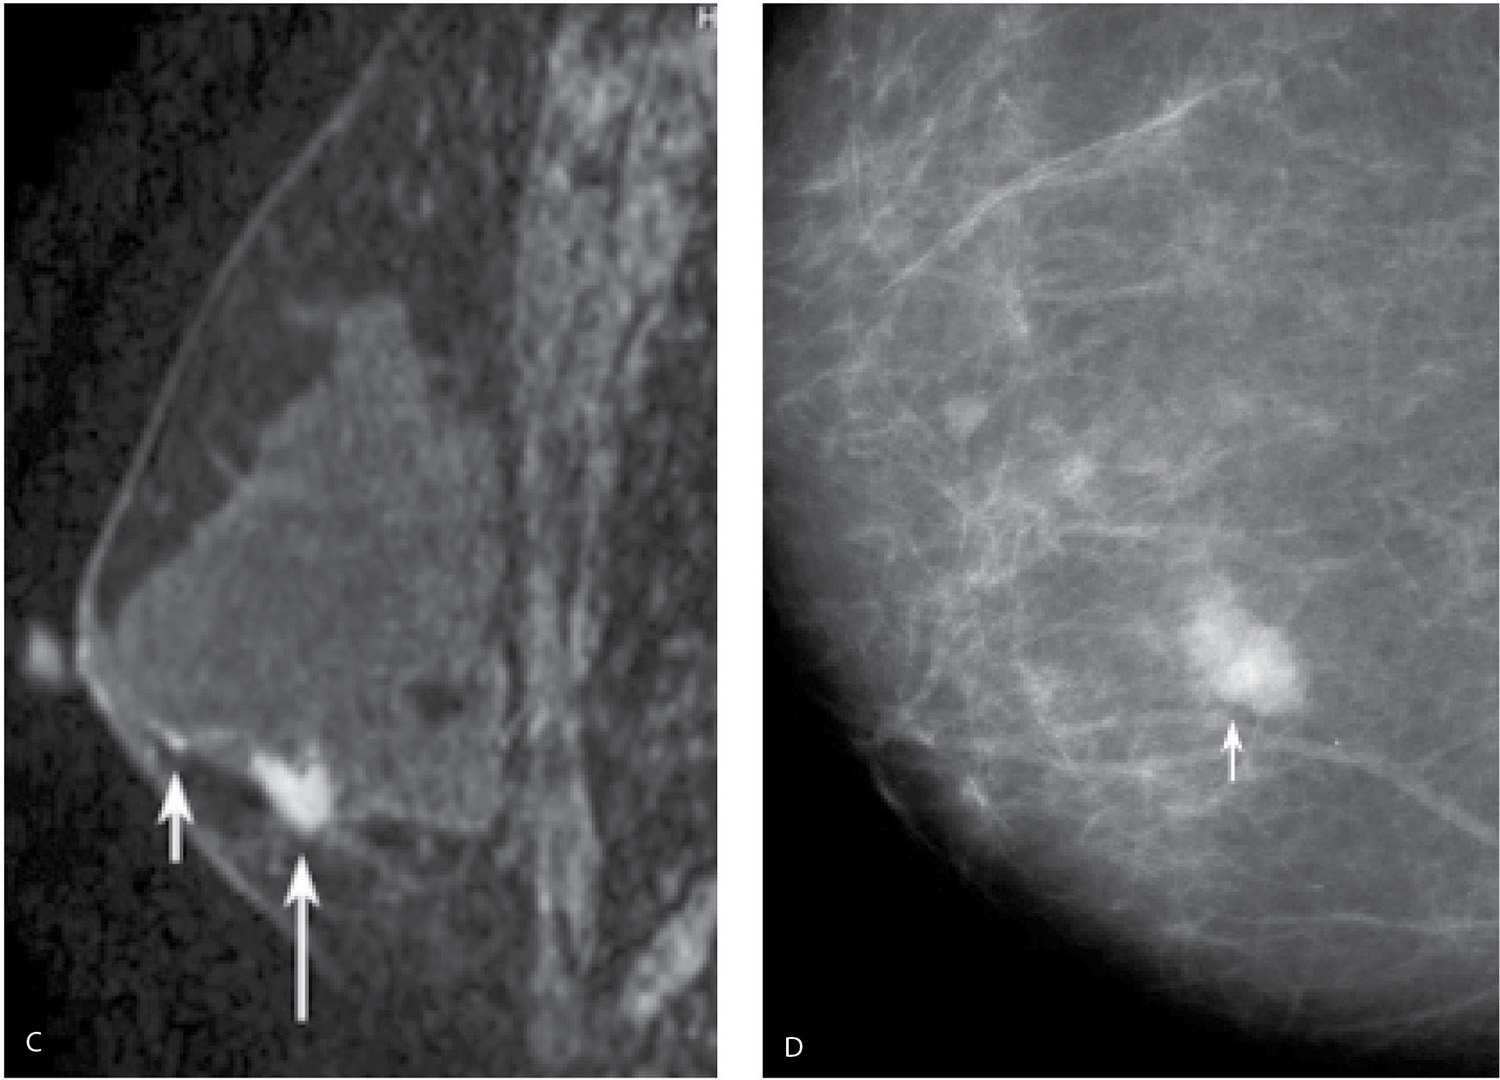 Calcified grade 3 solid DCIS in a 33-year-old woman with a palpable